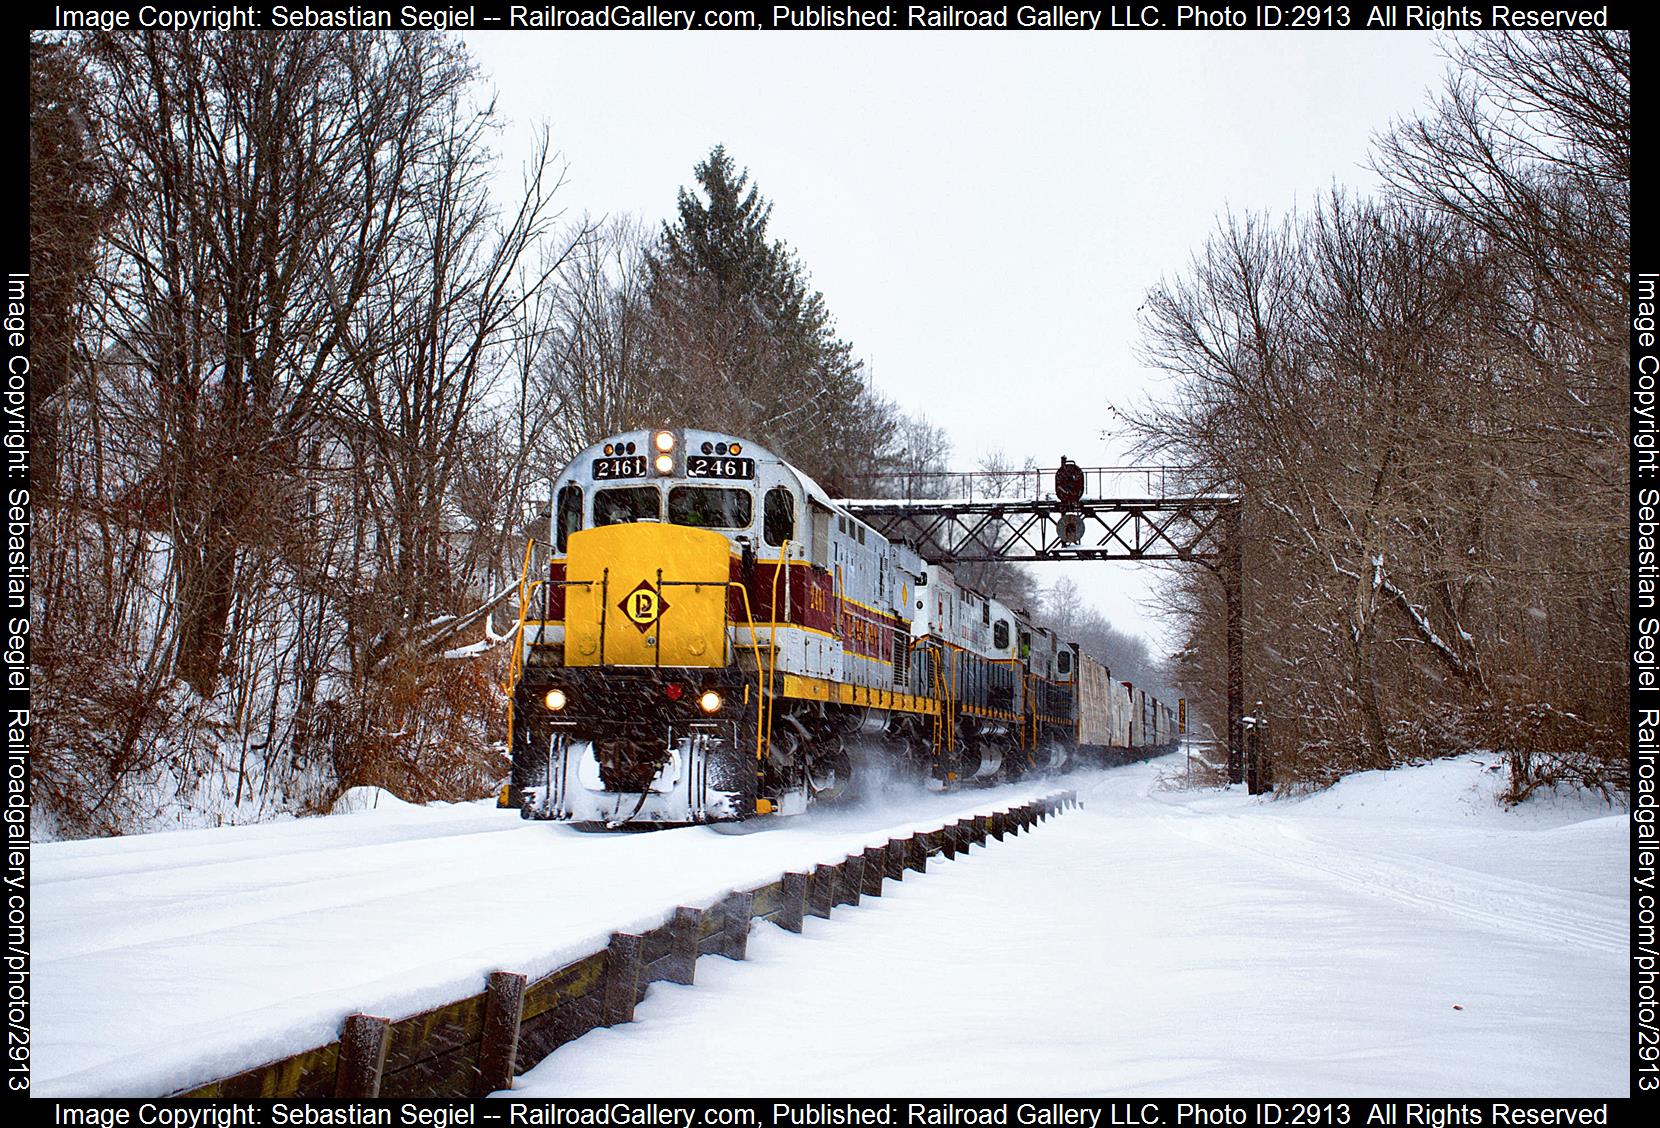 2461 is a class C425 and  is pictured in Moscow PA, Pennsylvania, United States.  This was taken along the Pocono Mainline on the Delaware Lackawanna. Photo Copyright: Sebastian Segiel uploaded to Railroad Gallery on 01/09/2024. This photograph of 2461 was taken on Tuesday, January 09, 2024. All Rights Reserved. 